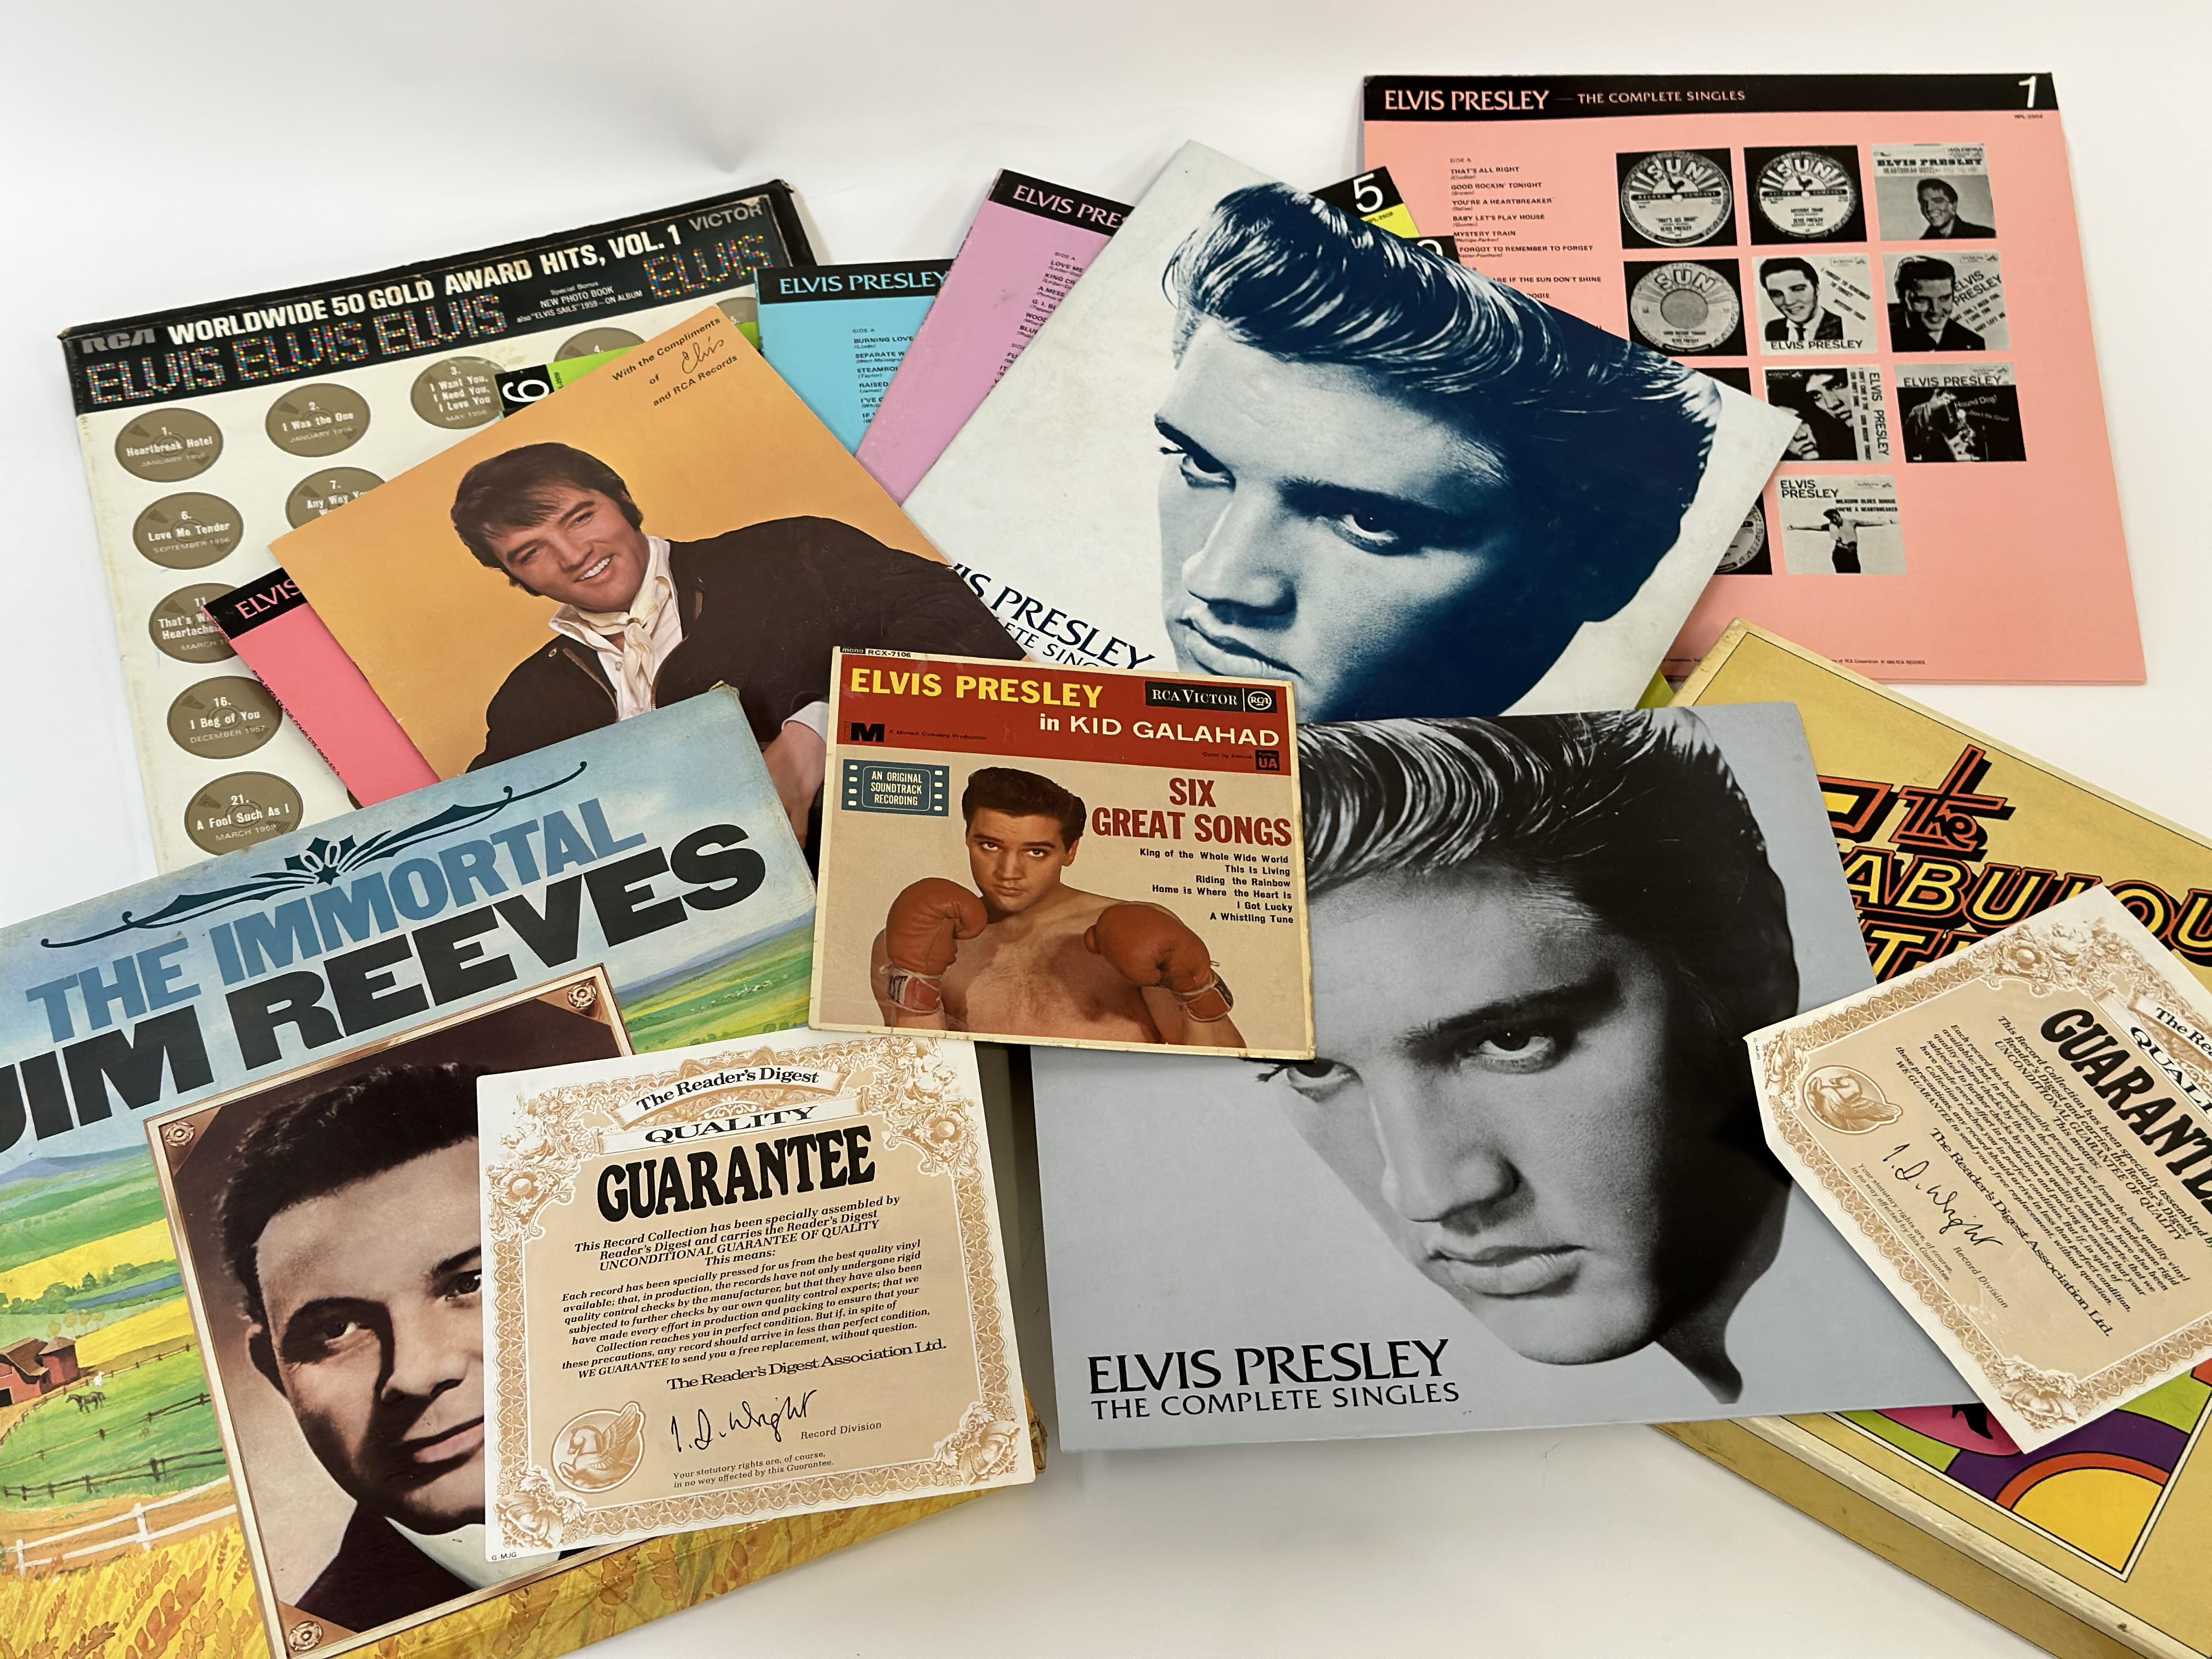 A collection of various records comprising - Worldwide 50 Gold Award Hits, Vol 1 - Elvis Presley,